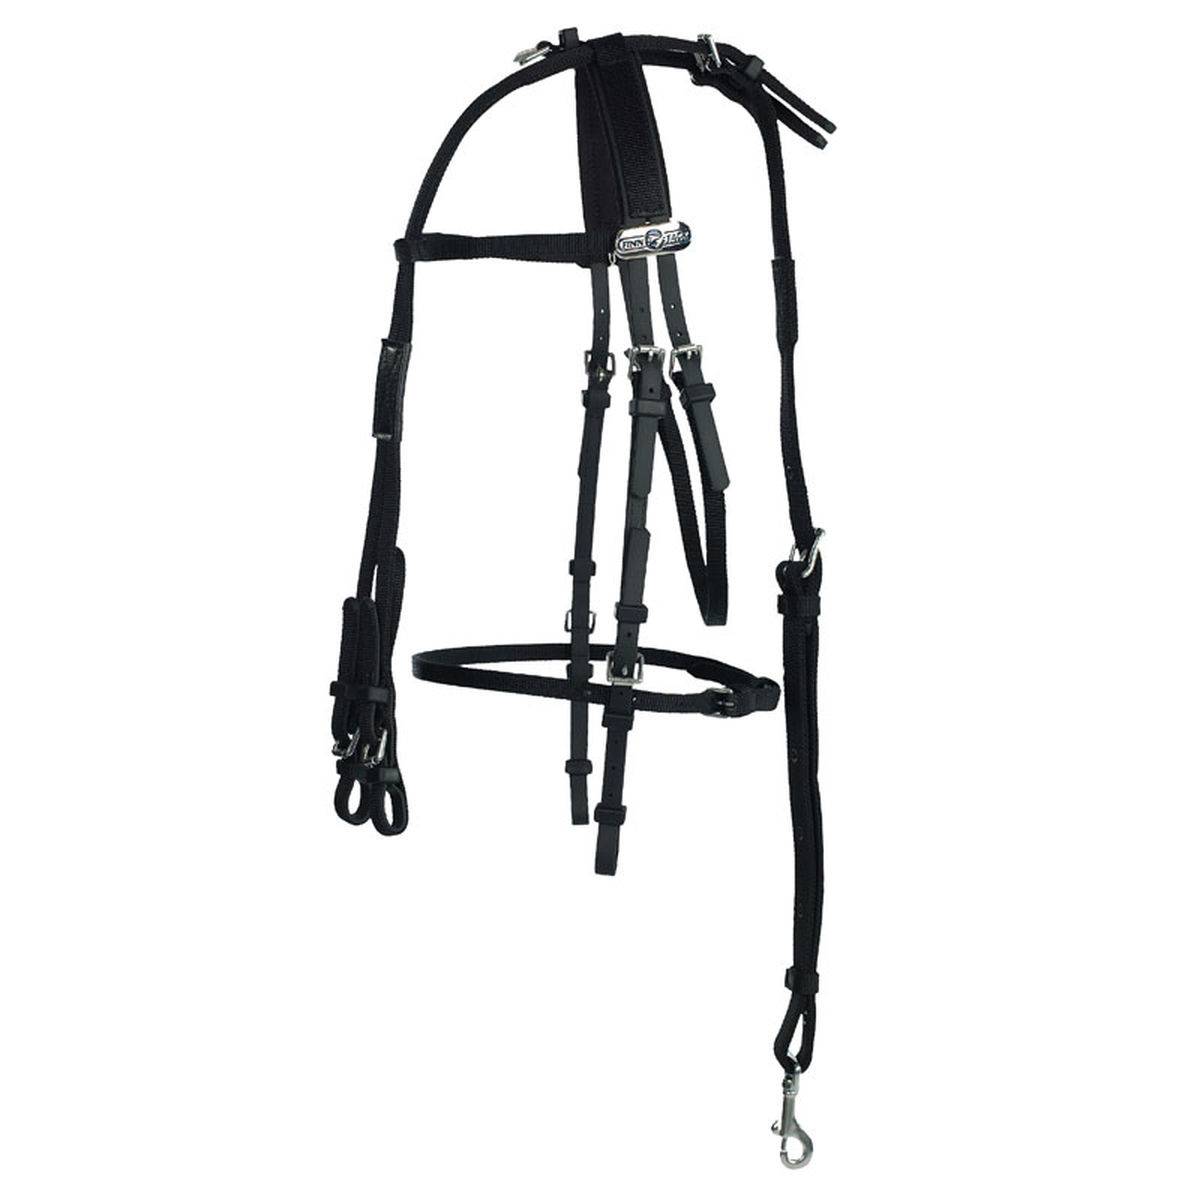 Finntack Complete Pro Harness Bridle